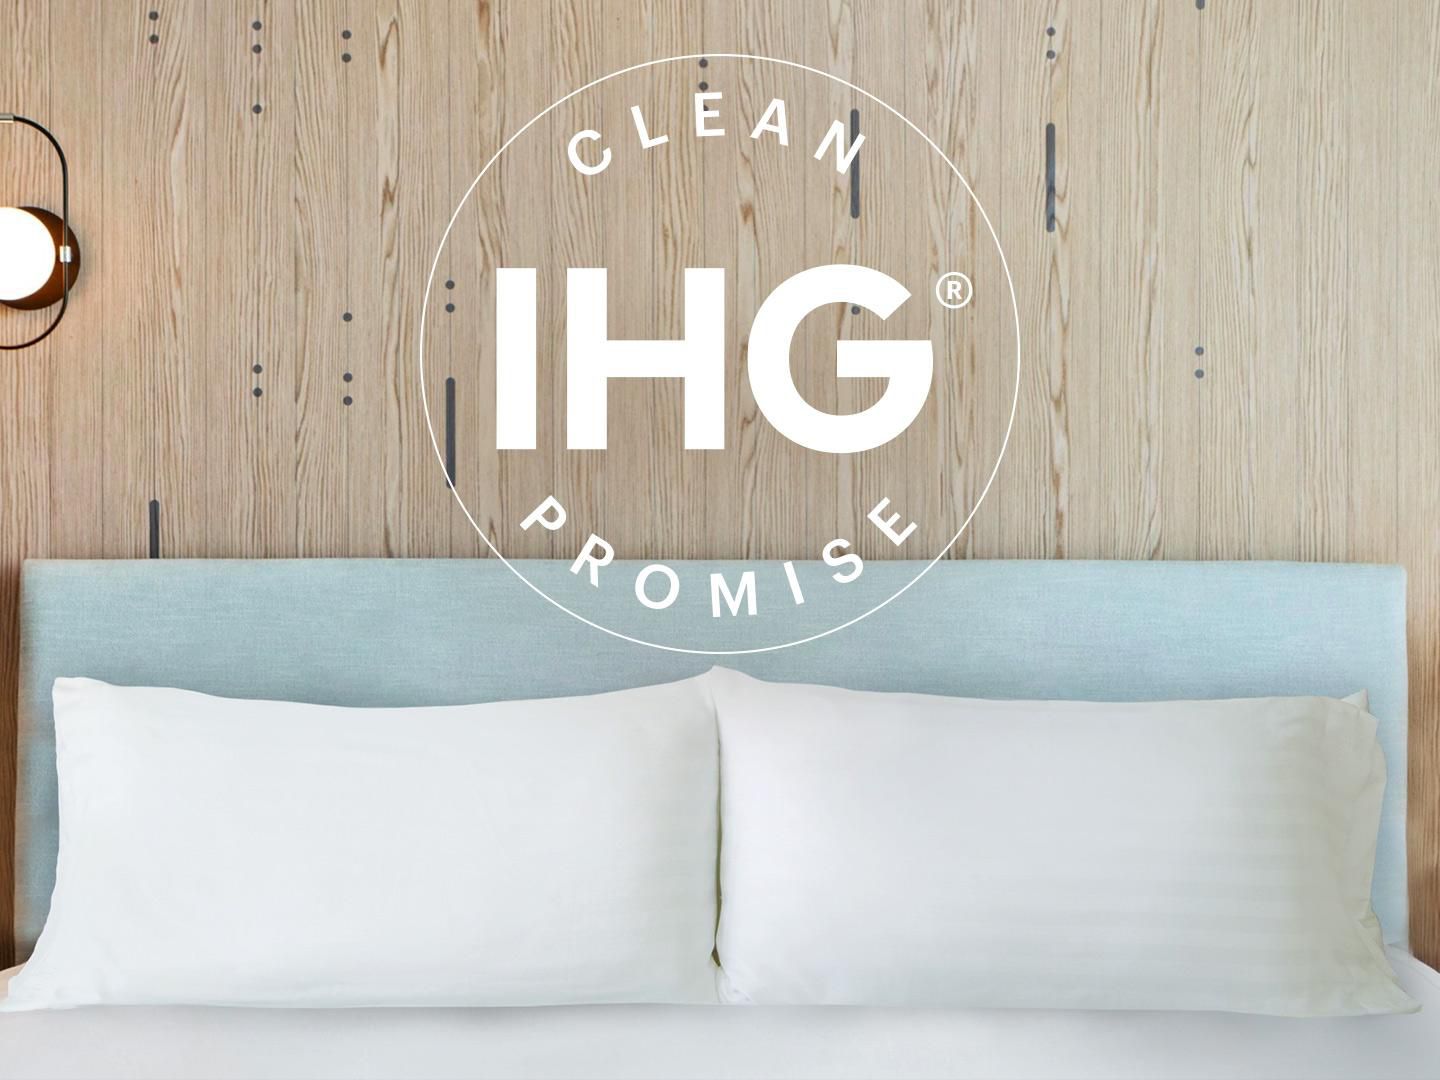 IHG Way of Clean includes deep cleaning with hospital-grade disinfectants, and guests can expect to see enhanced procedures, which may include: face covering requirements, various ways to reduce contact throughout the hotel, social distancing measures within public spaces and procedures based on local authorities’ guidance and/or advice.